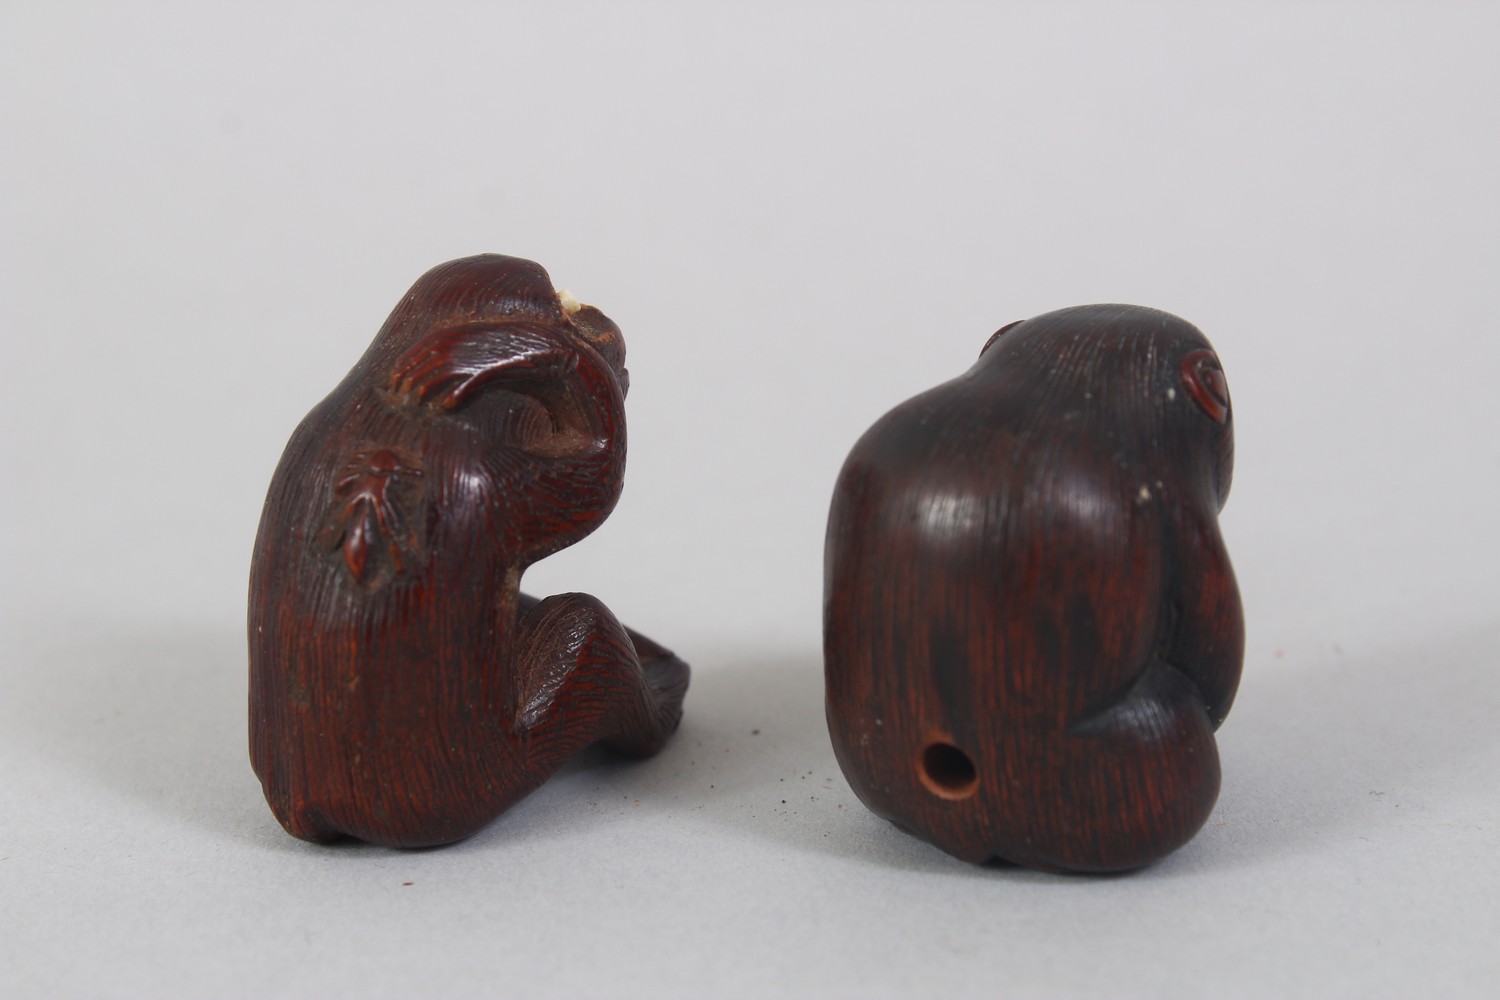 TWO GOOD JAPANESE MEIJI PERIOD CARVED WOODEN NETSUKE OF MONKEYS, both monkeys in seated positions - Image 3 of 4